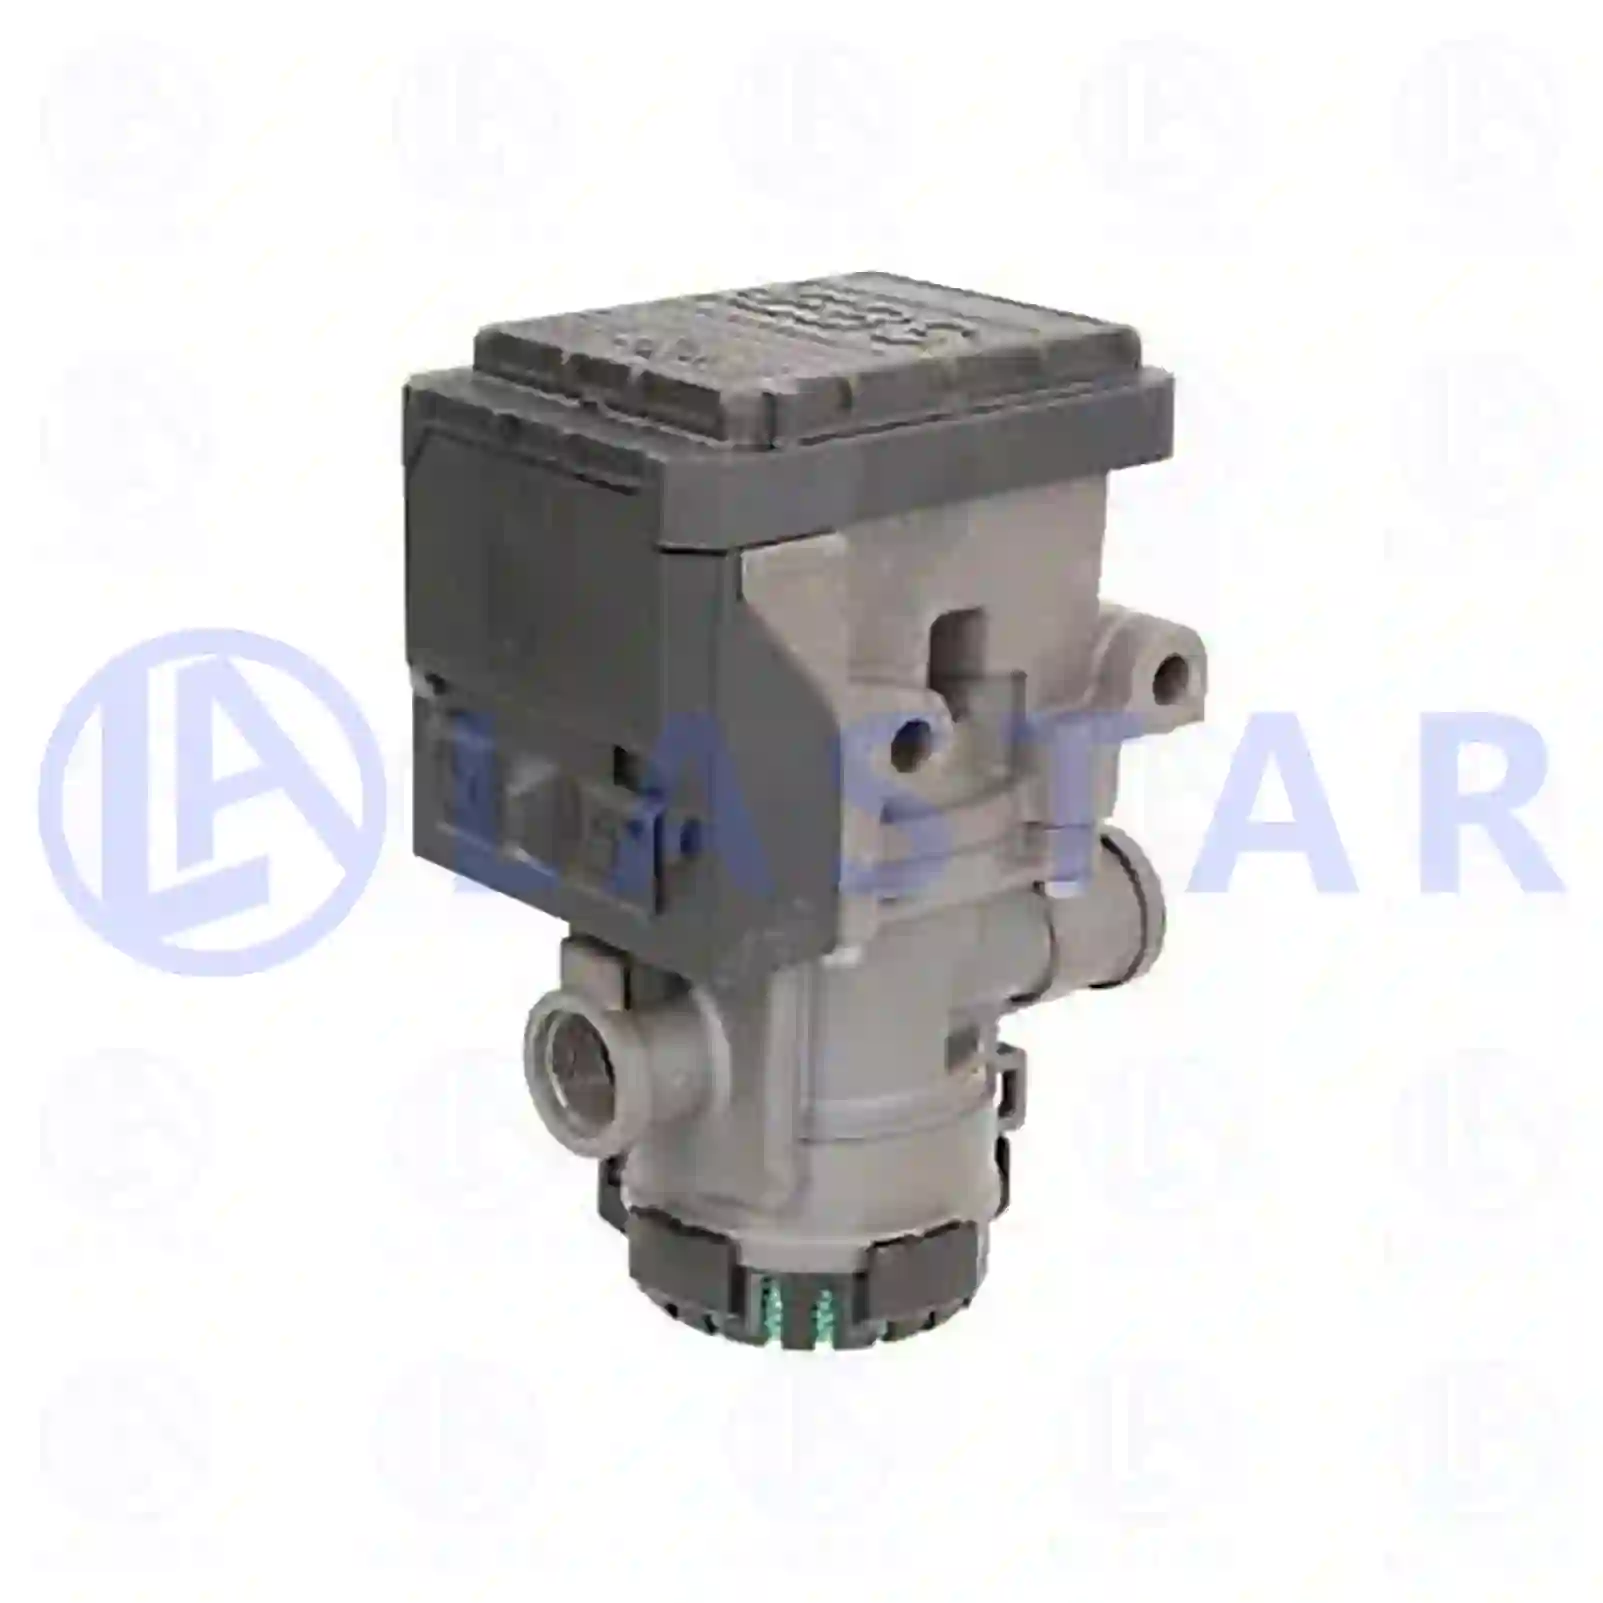 Modulating valve, EBS, reman. / without old core, 77713990, 81521066016, 81521066025, 81521066041, 81521066047, 81521066049, 81521069016, 2V5611555B ||  77713990 Lastar Spare Part | Truck Spare Parts, Auotomotive Spare Parts Modulating valve, EBS, reman. / without old core, 77713990, 81521066016, 81521066025, 81521066041, 81521066047, 81521066049, 81521069016, 2V5611555B ||  77713990 Lastar Spare Part | Truck Spare Parts, Auotomotive Spare Parts